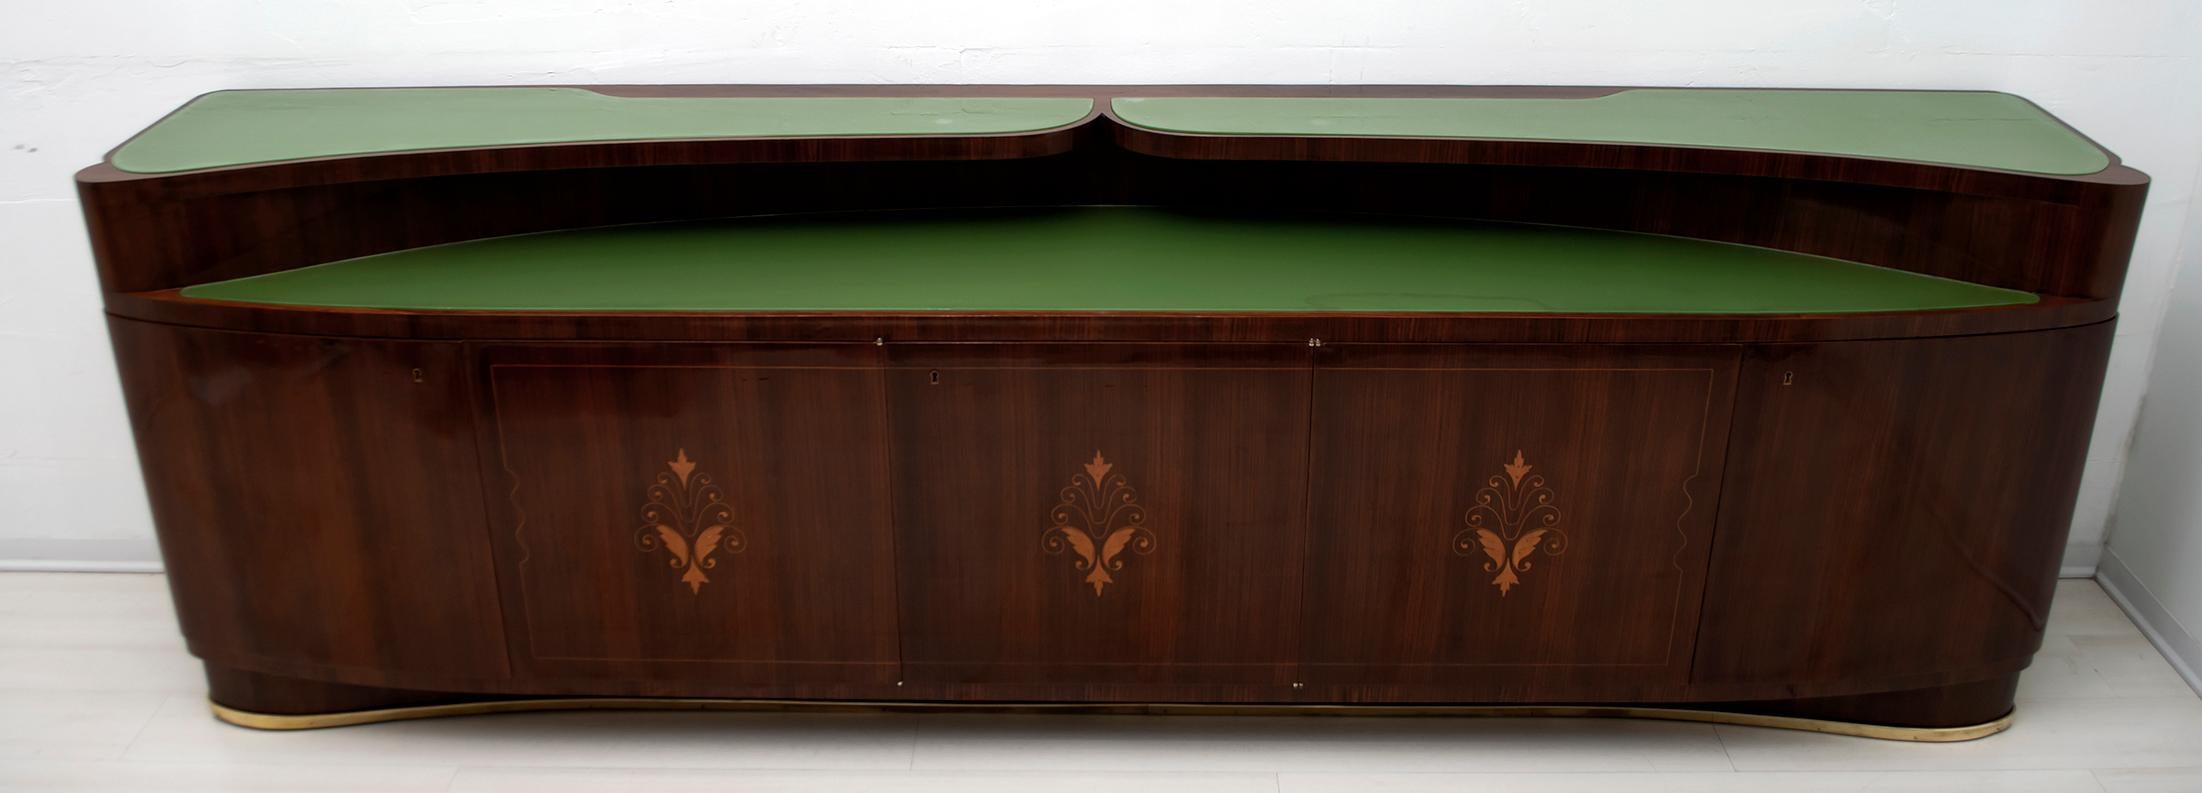 This sideboard was designed by the famous Italian design Vittorio Dassi, produced by the company of the same name: Dassi Lissone Milan, Italy 1950s, the furniture is in rosewood and green glass tops, the rosewood doors show an elegant maple inlay,